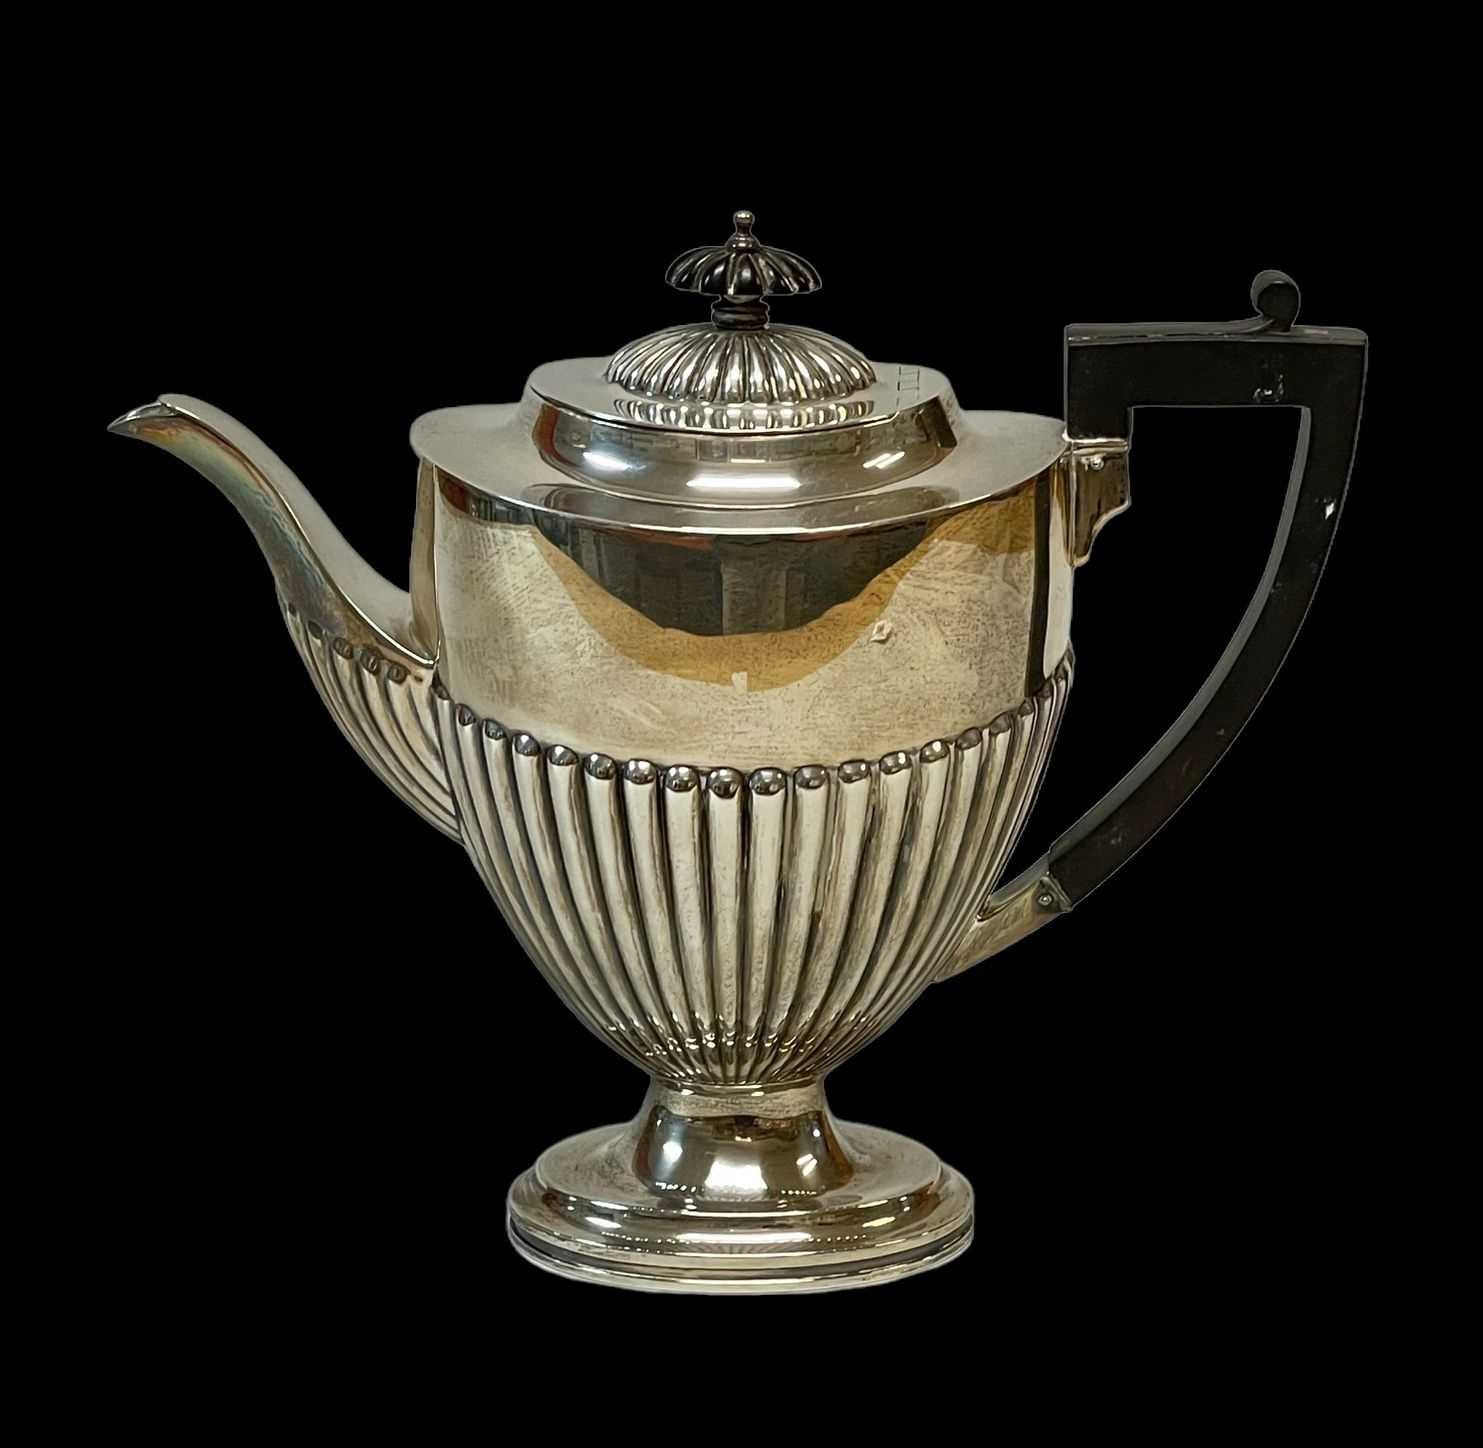 GEORGE V SILVER COFFEE POT, Chester 1920, half fluted oval form on low socle base, 24.5ozt., 23.5cms